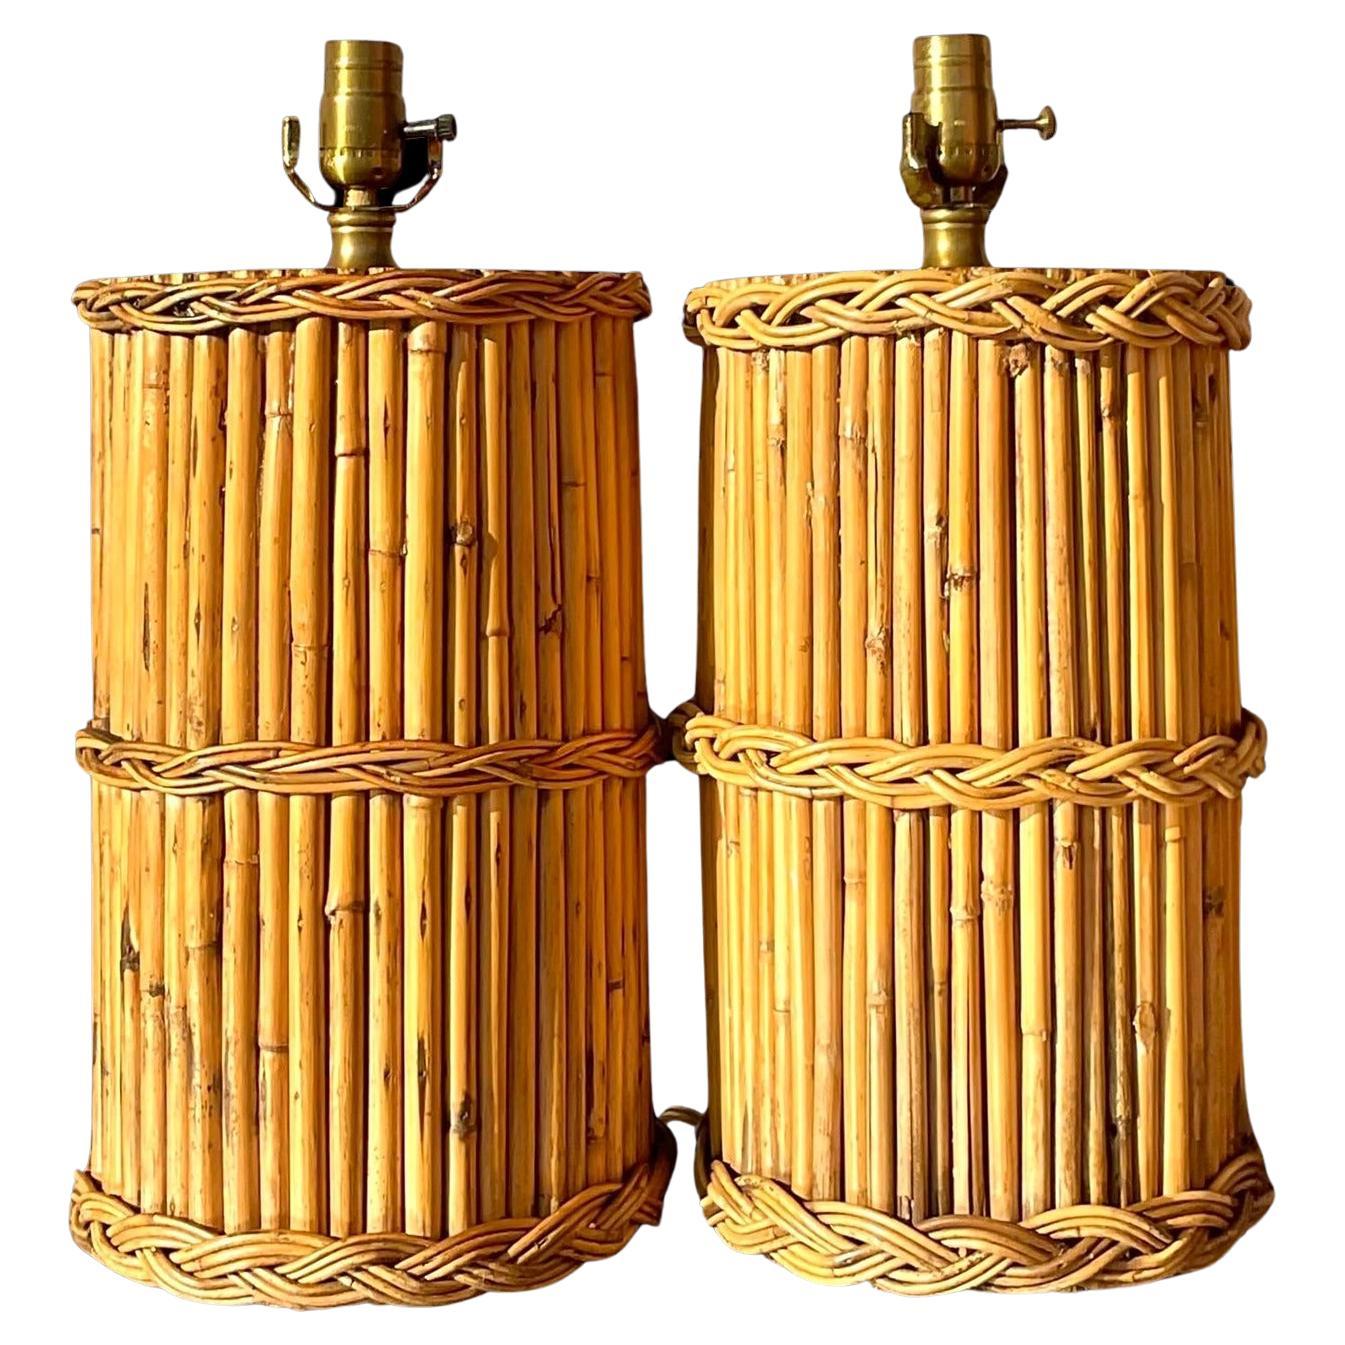 Vintage Coastal Braided Rattan Table Lamps - a Pair For Sale